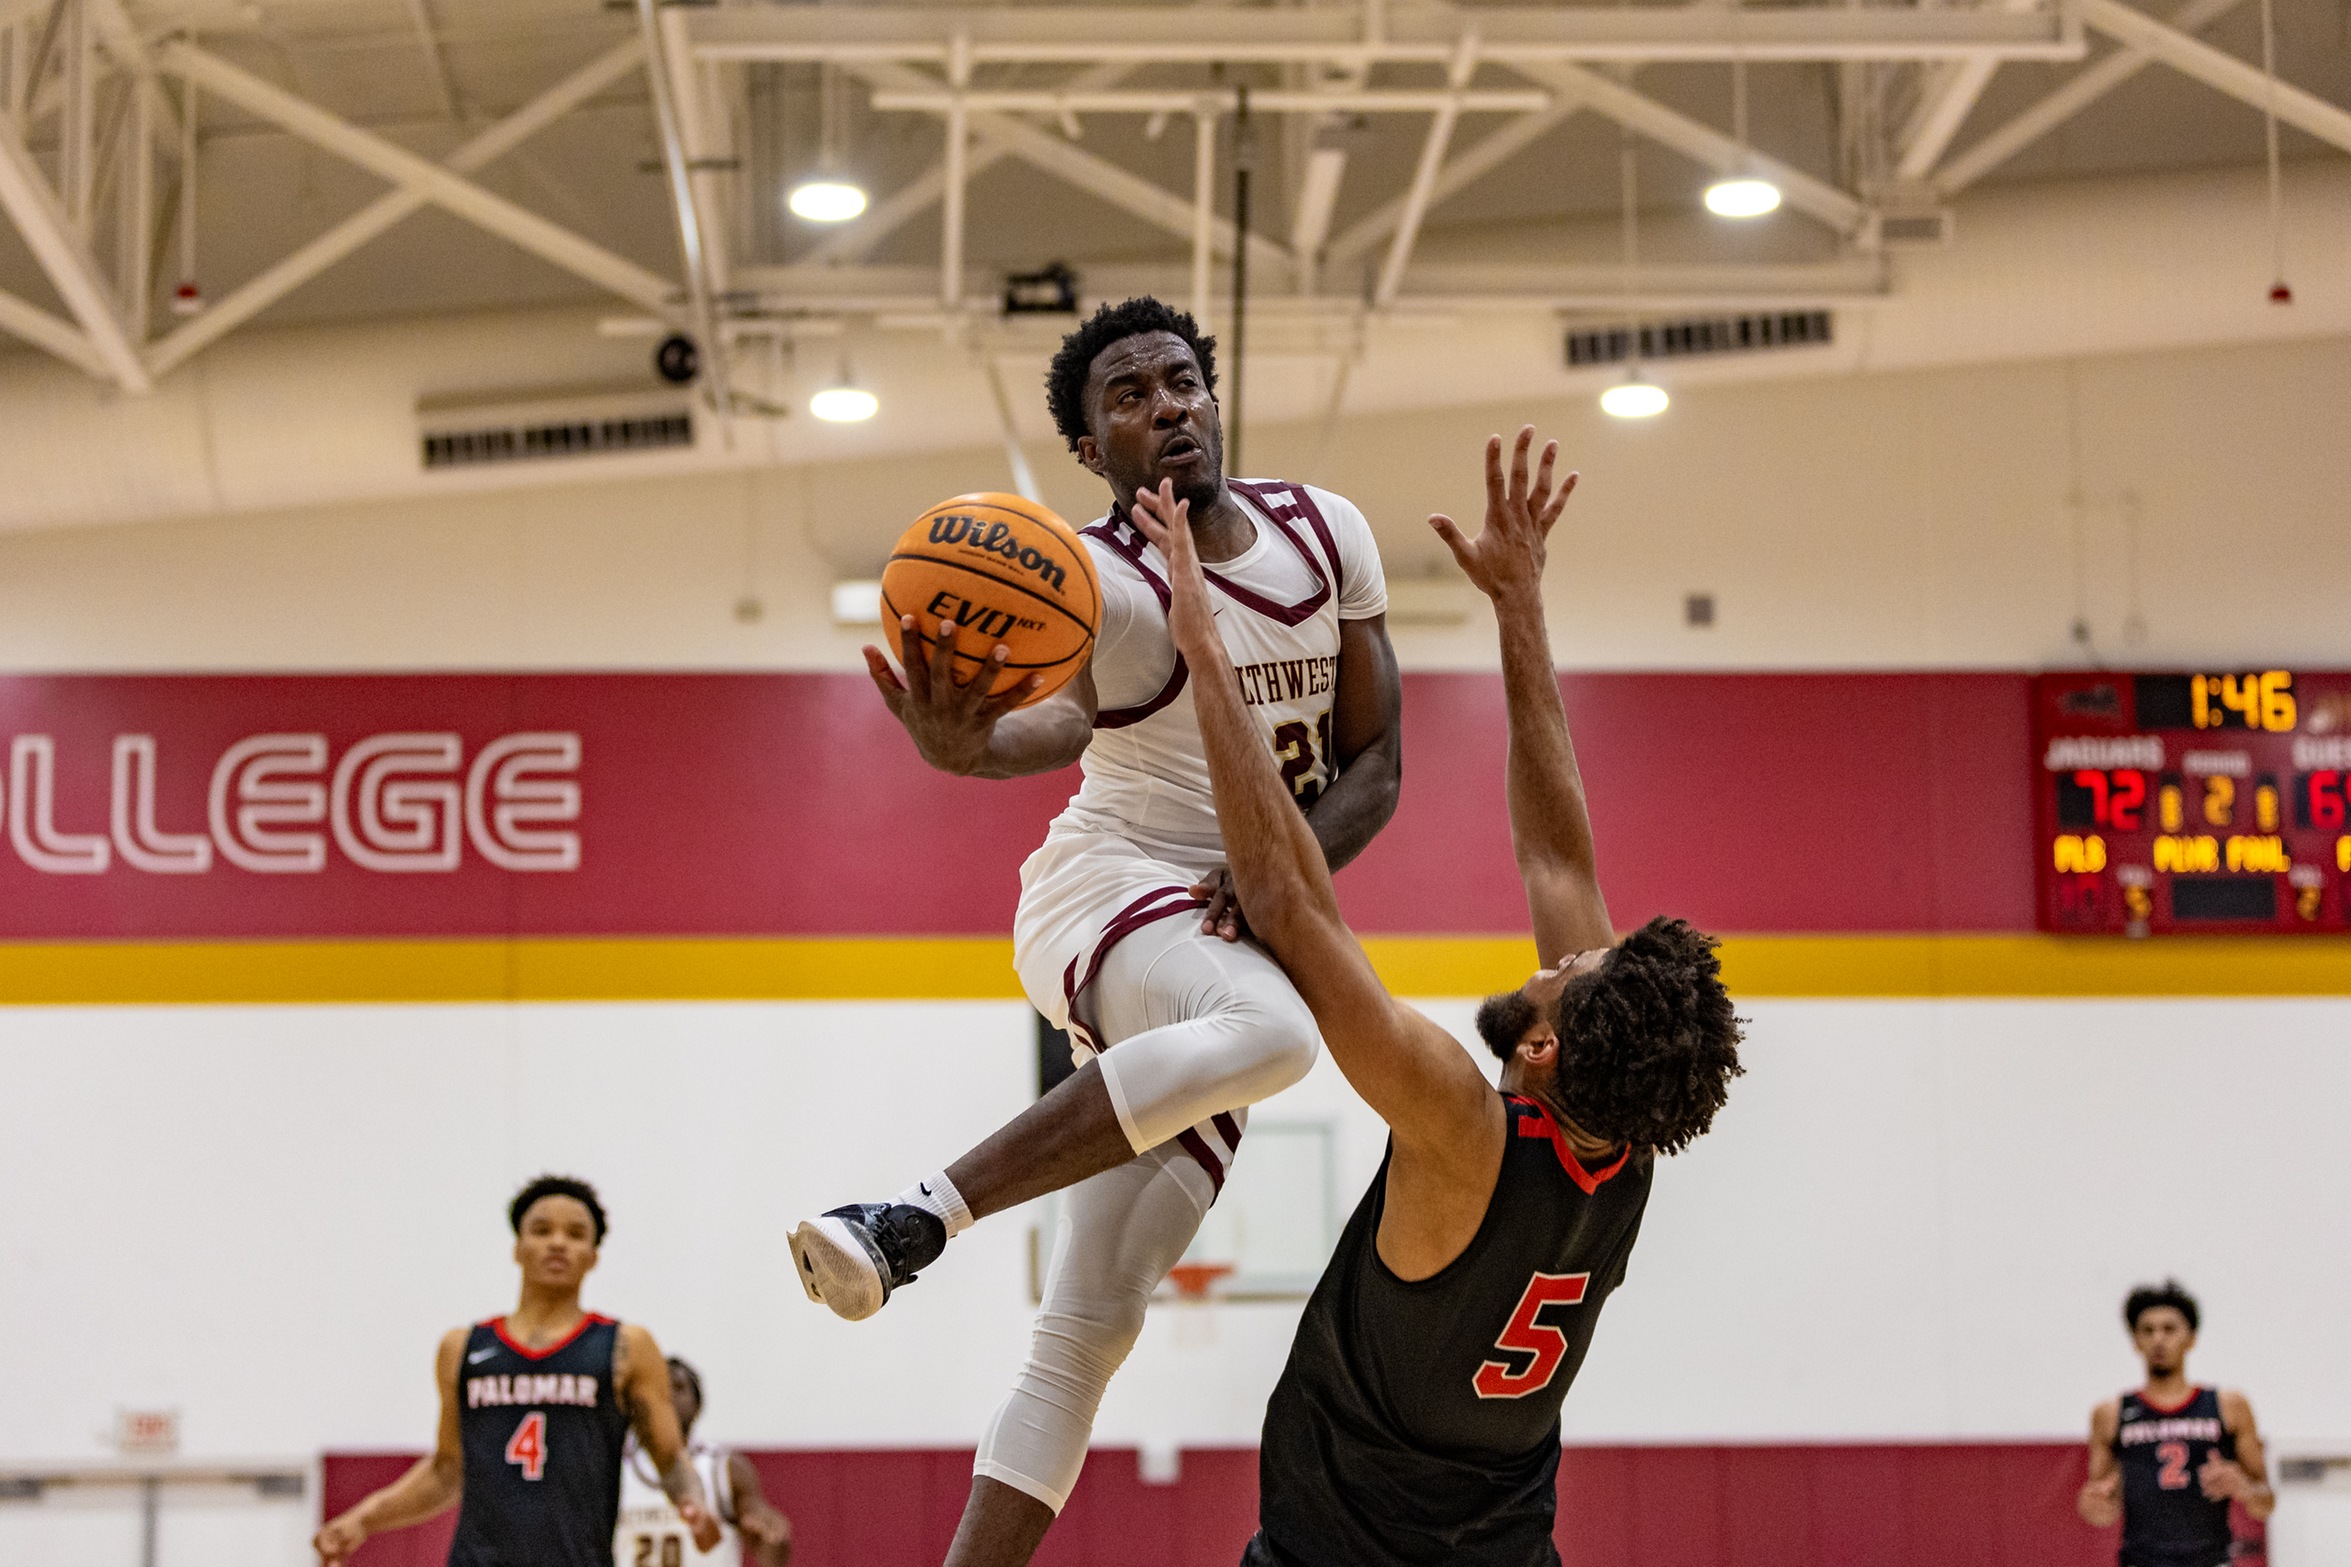 Jaguars Bounce Back with 78-68 Win Over Palomar